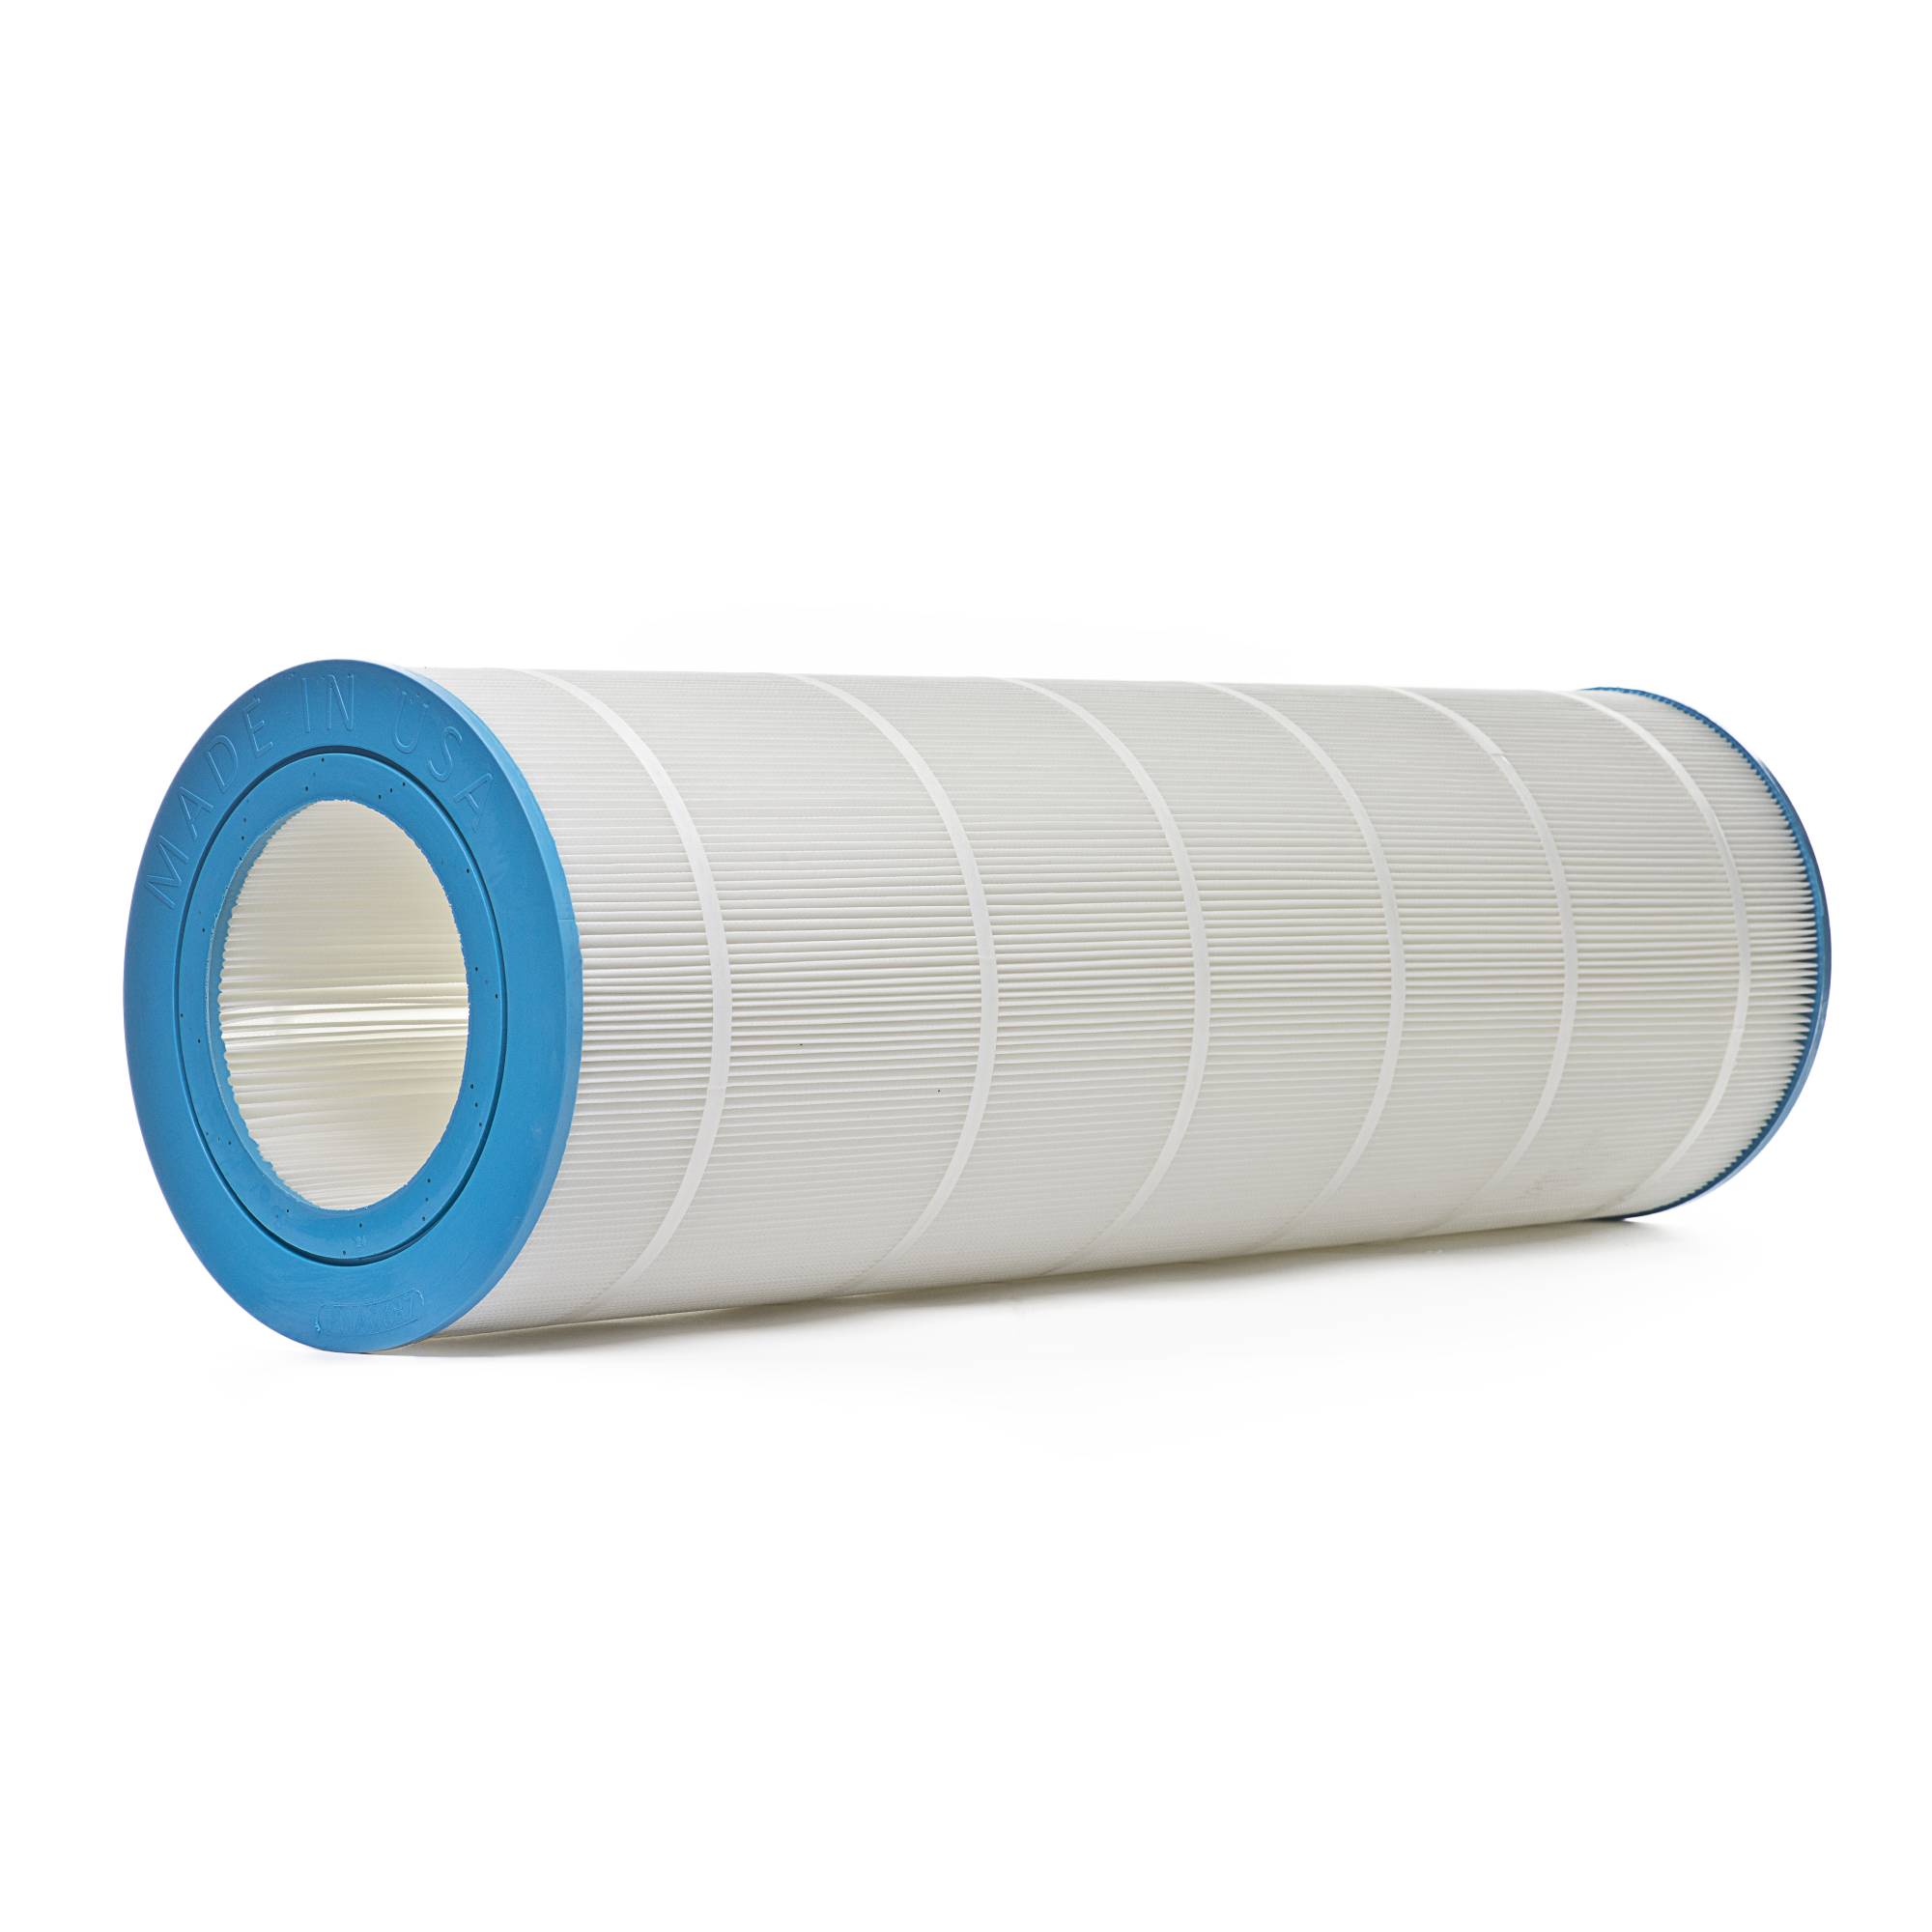 Filters Fast® FF-0111 Replacement Pool & Spa Filter Cartridge